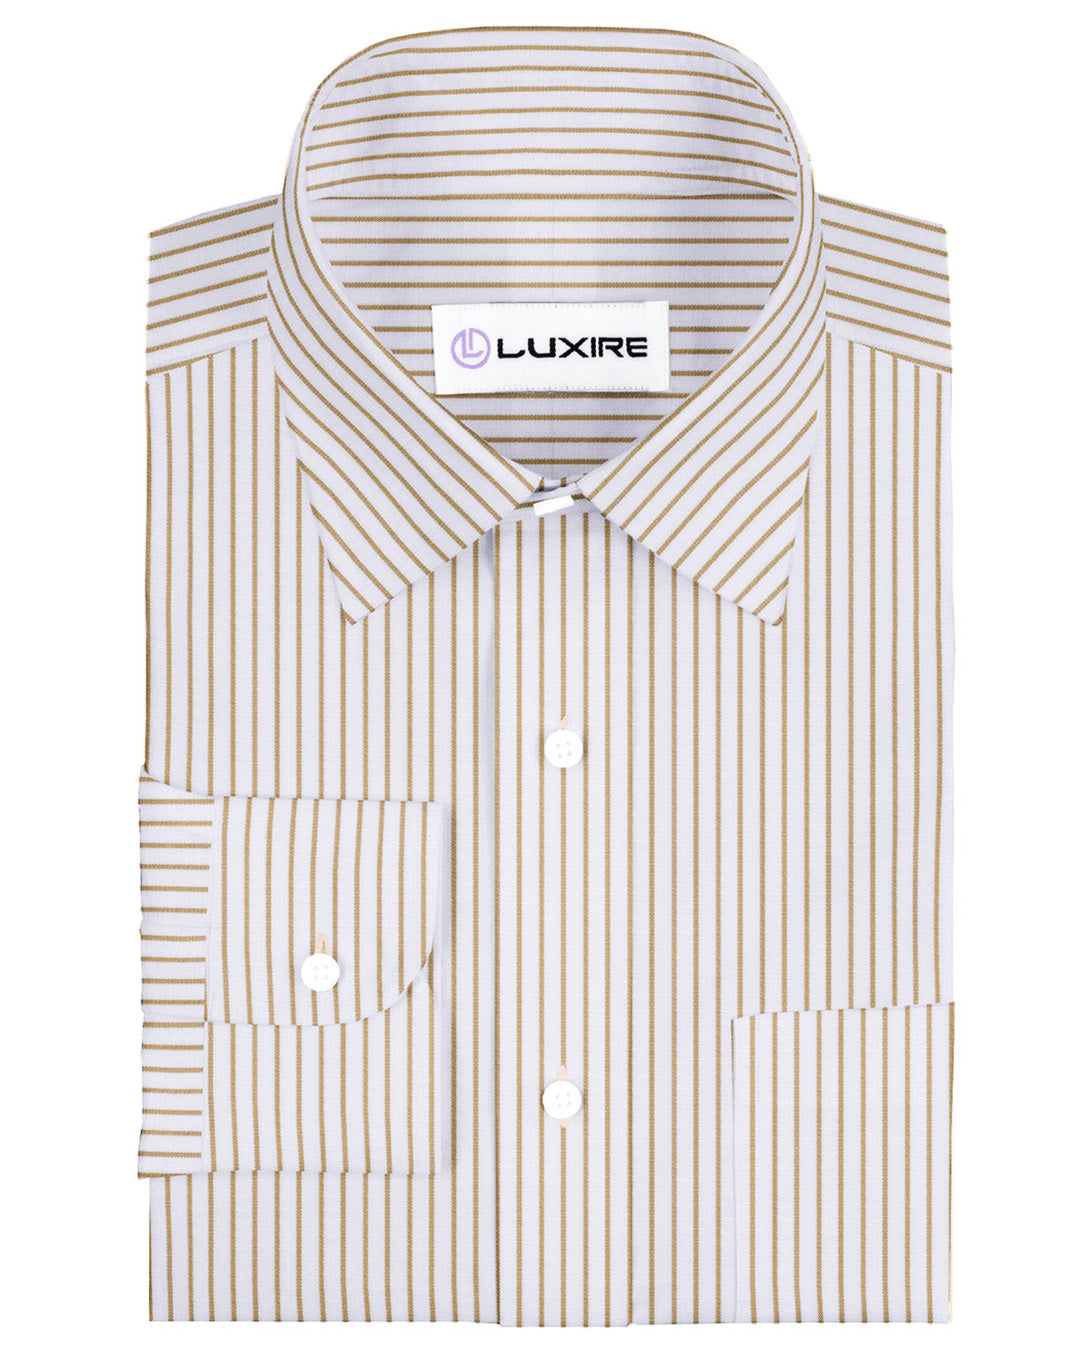 Front of the custom linen shirt for men in white with ecru stripes by Luxire Clothing